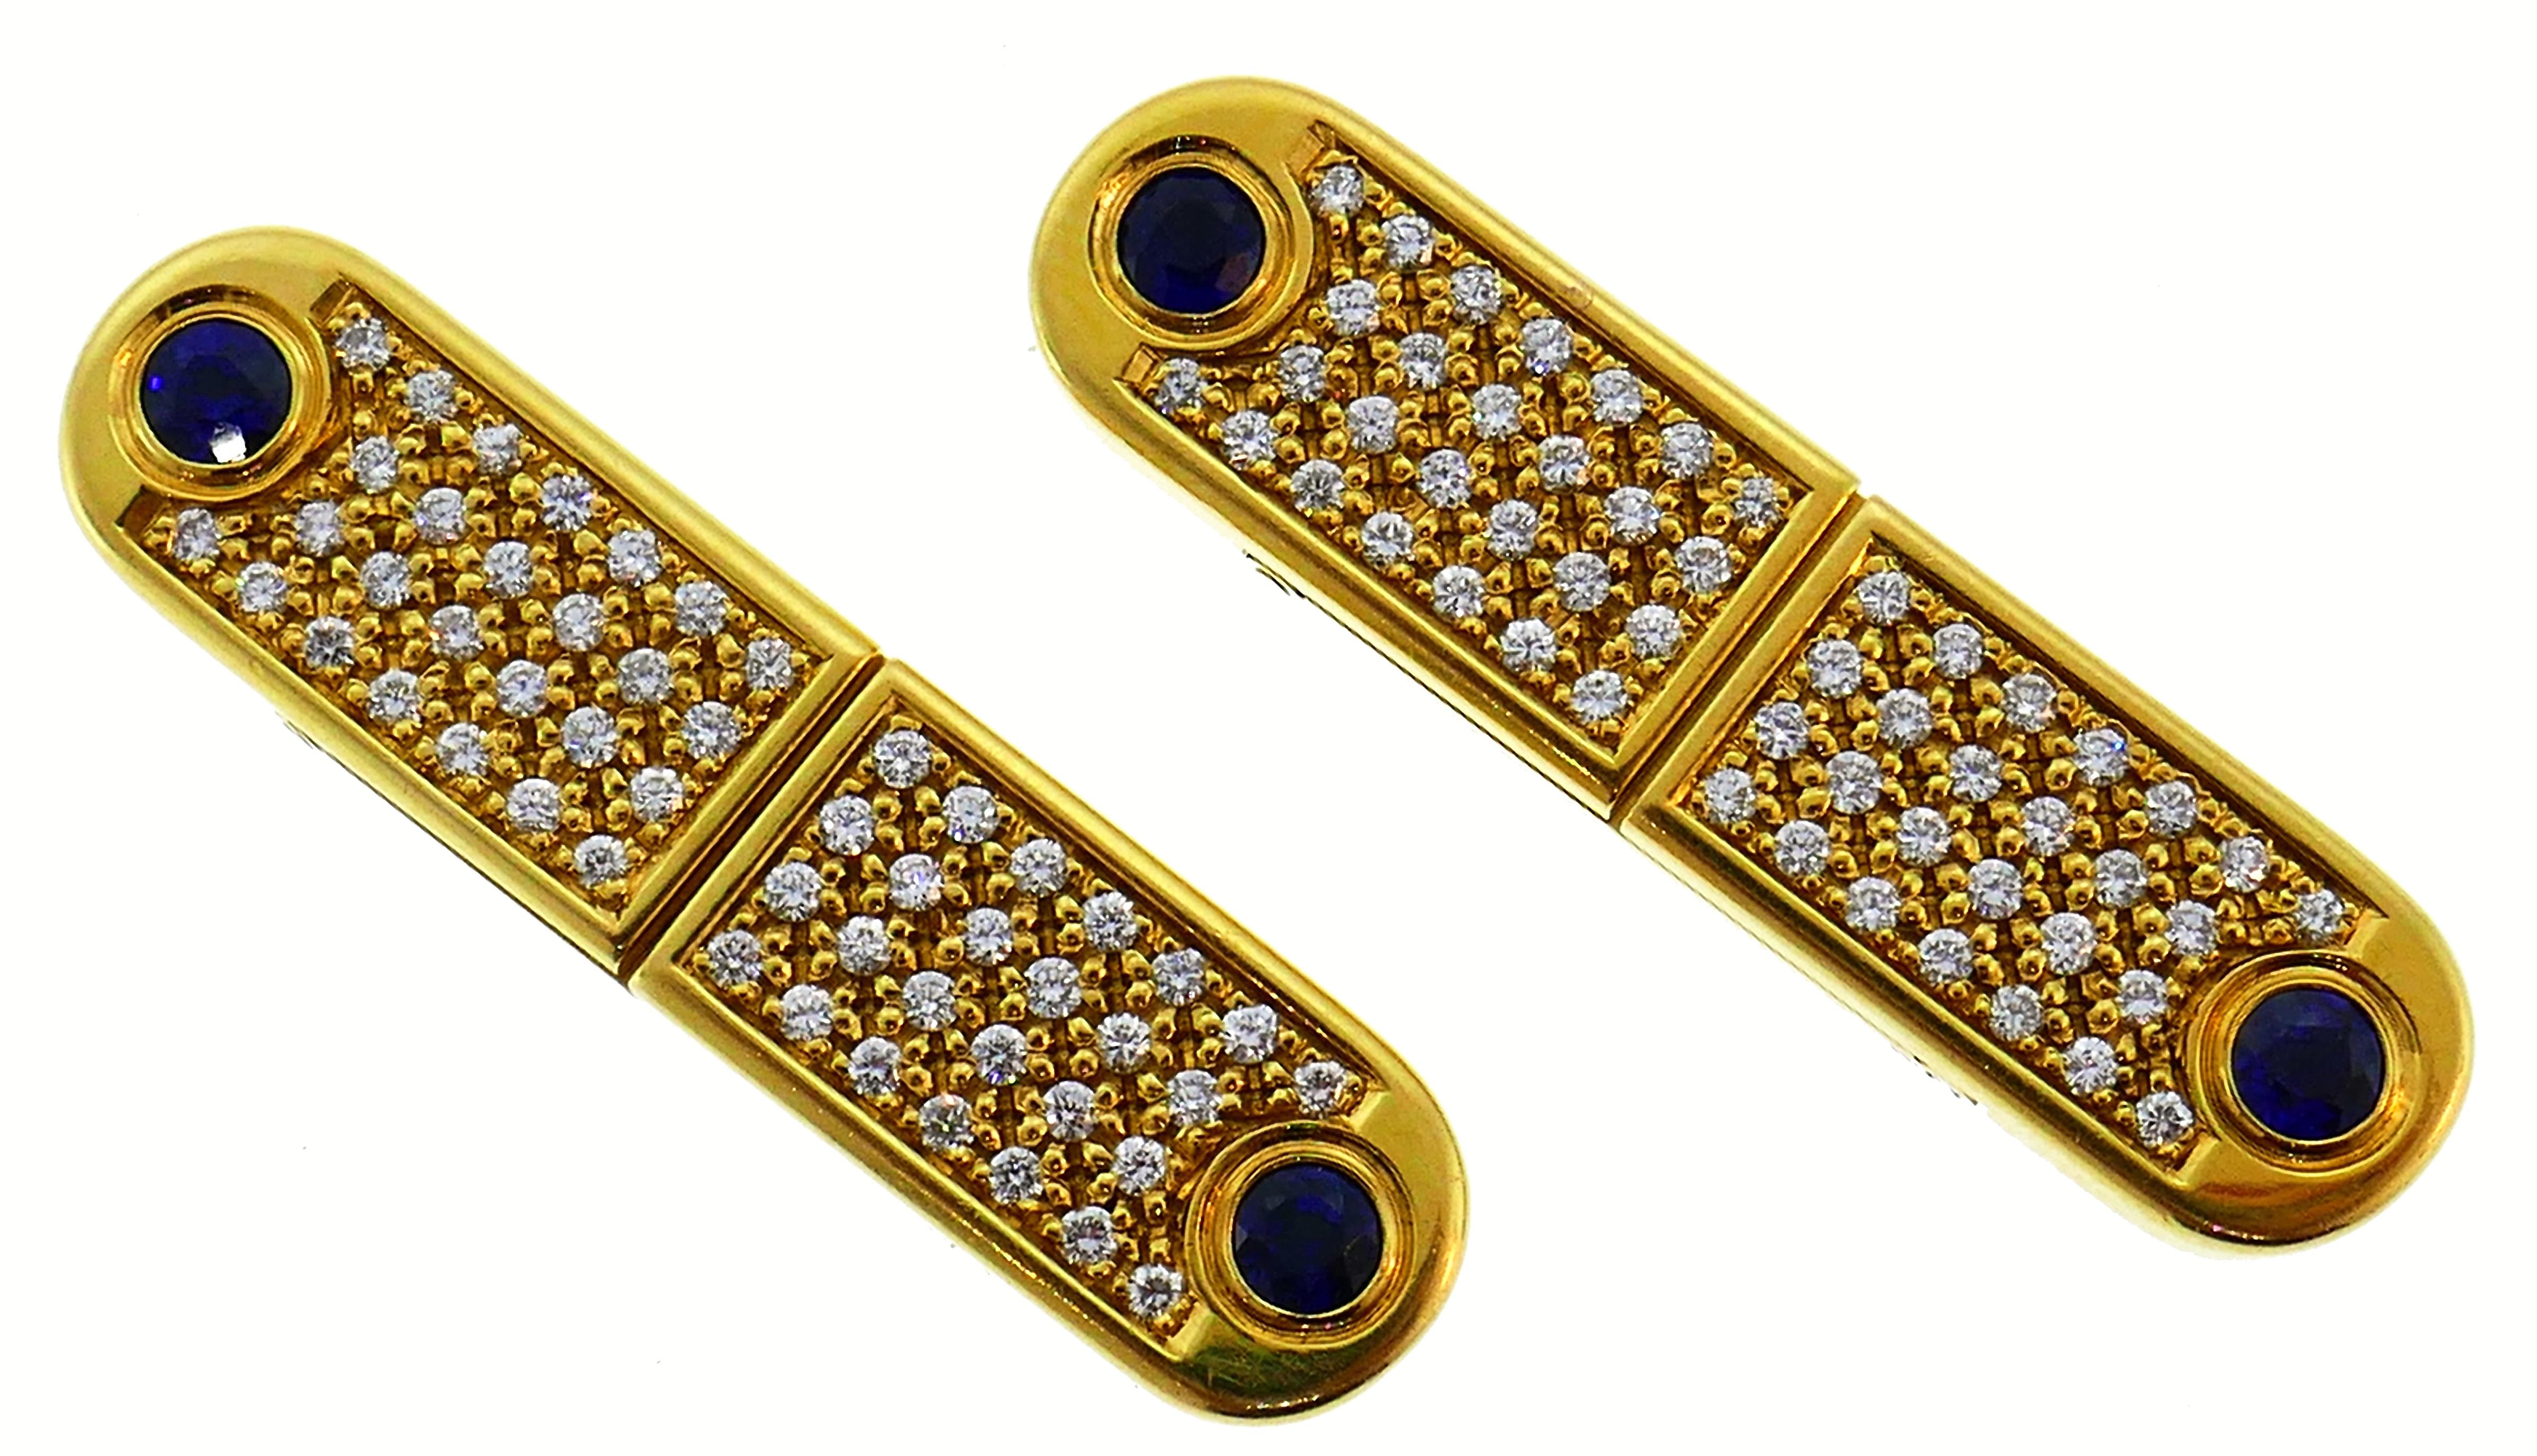 Classy cufflinks created by Boucheron, Paris. Elegant and timeless, the cufflinks are a great addition to your jewelry and accessories collection. 
Made of 18 karat (stamped) yellow gold and set with round brilliant cut diamonds and round faceted